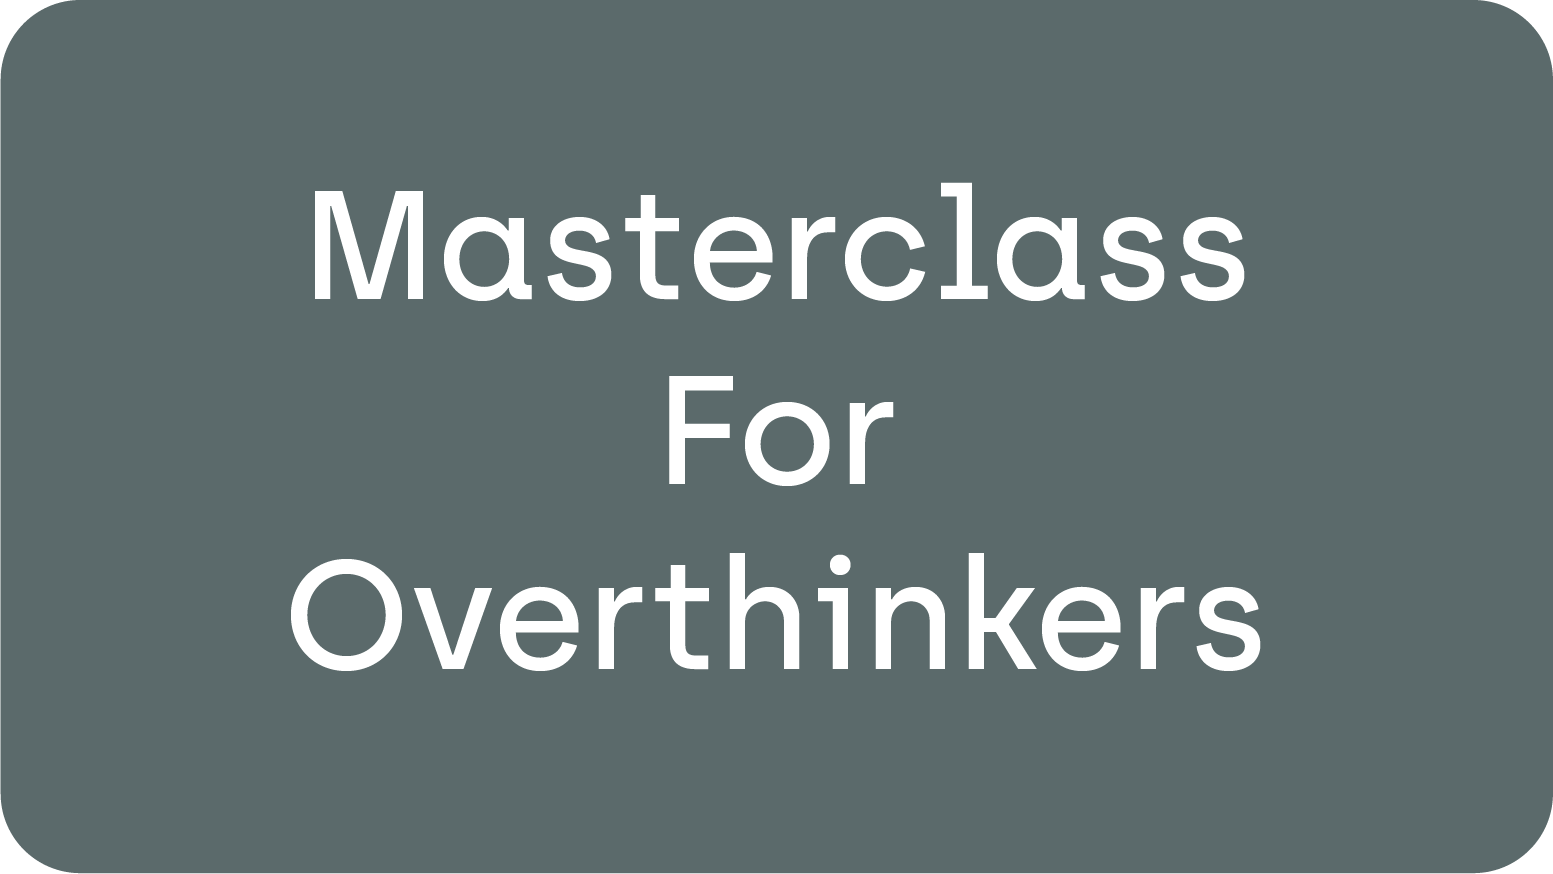 Masterclass for Overthinkers